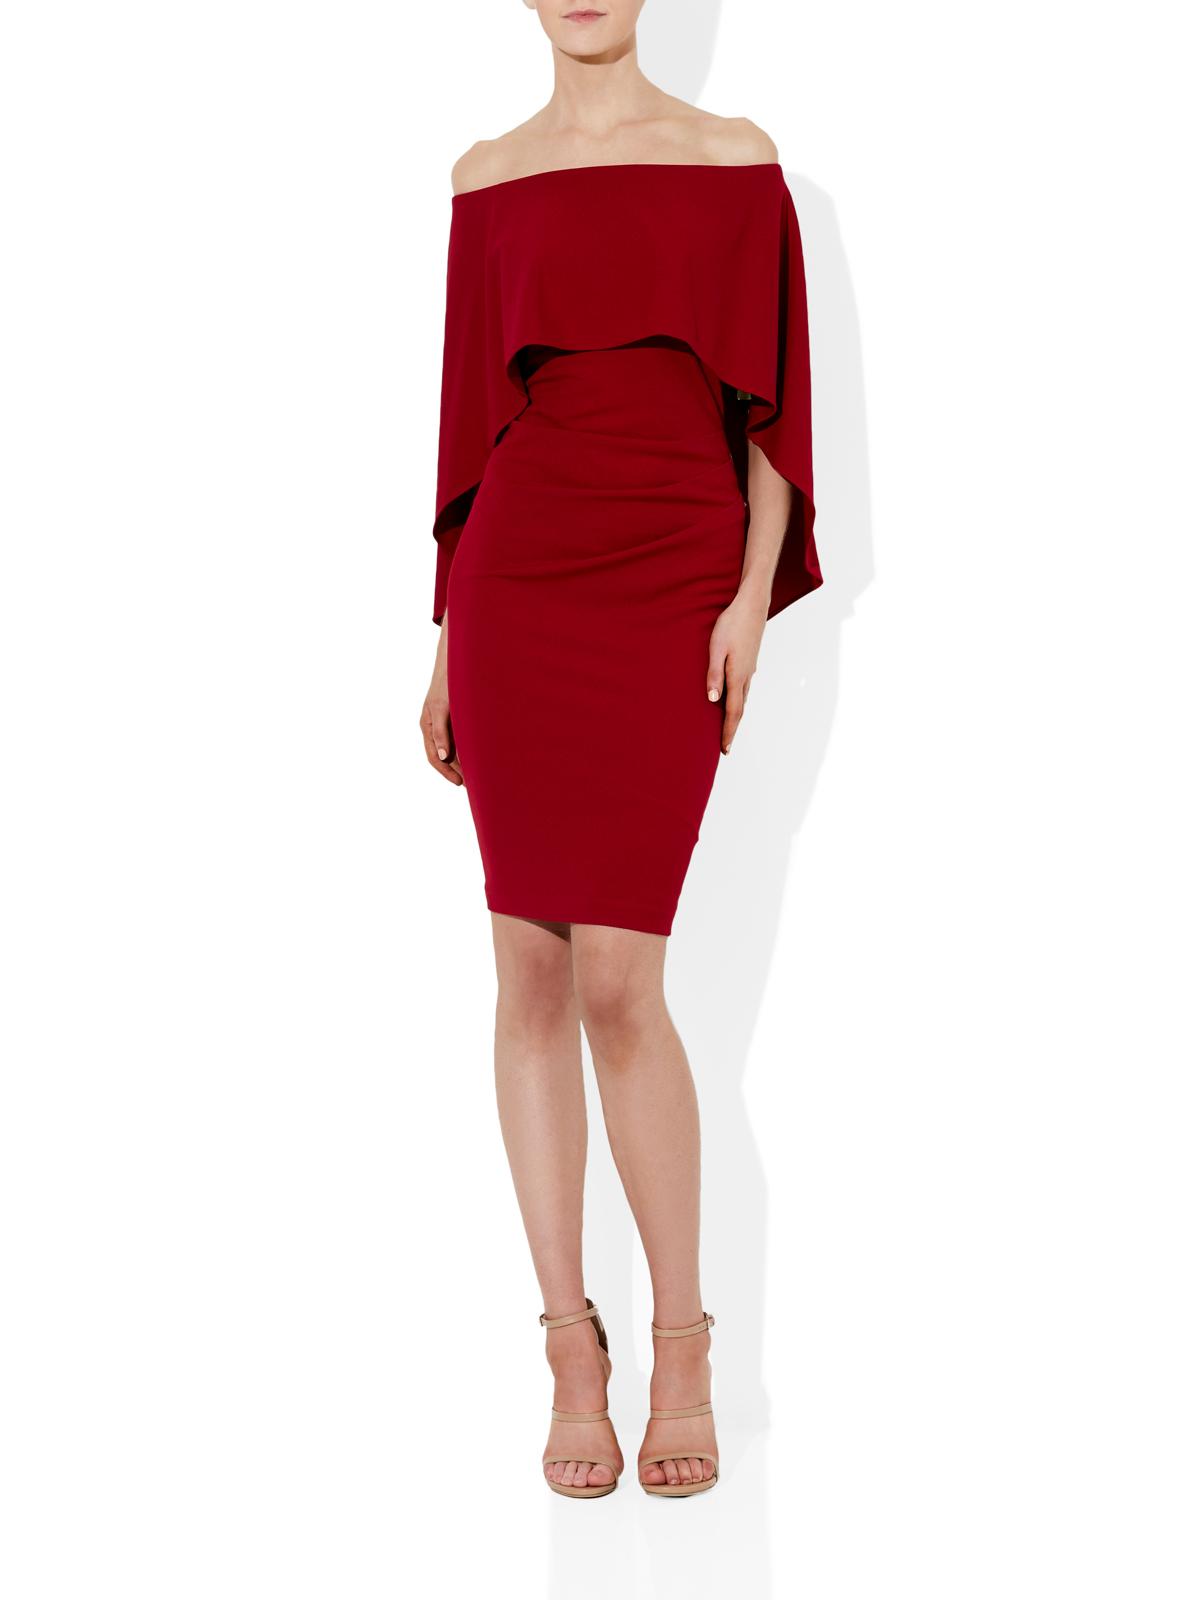 Aerin Red Crepe Dress by Montique